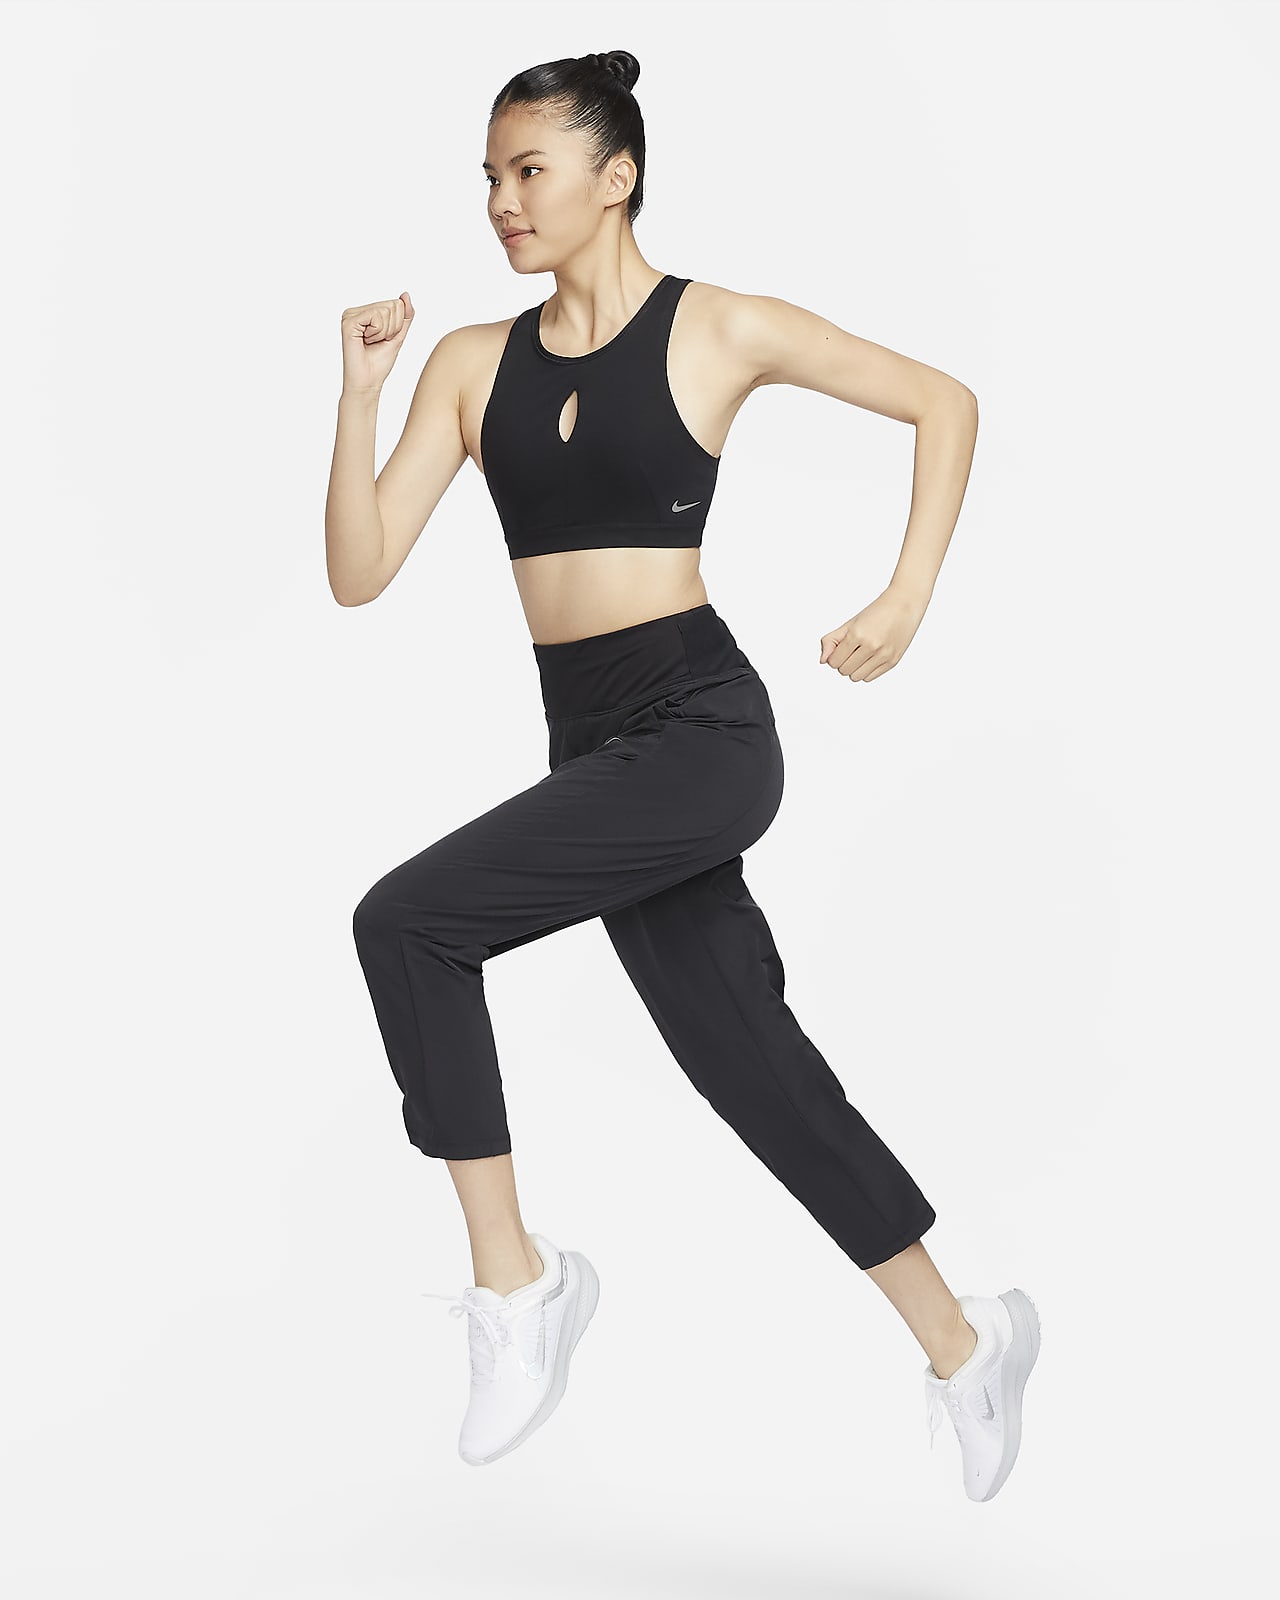 Nike Womens Fitness Running Athletic Pants 